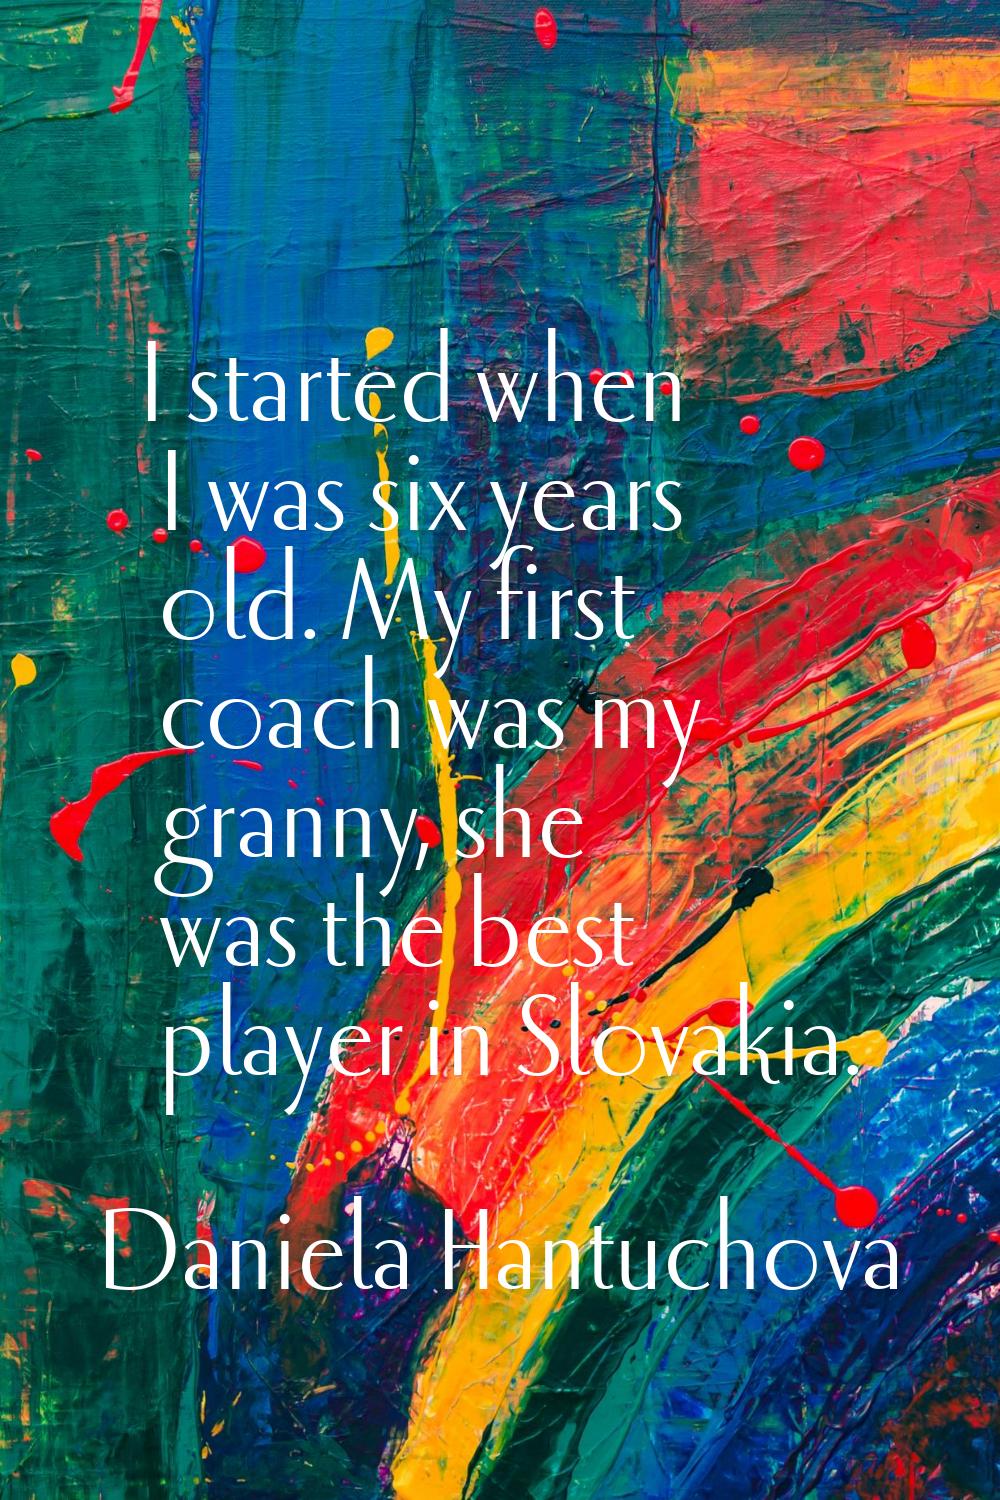 I started when I was six years old. My first coach was my granny, she was the best player in Slovak